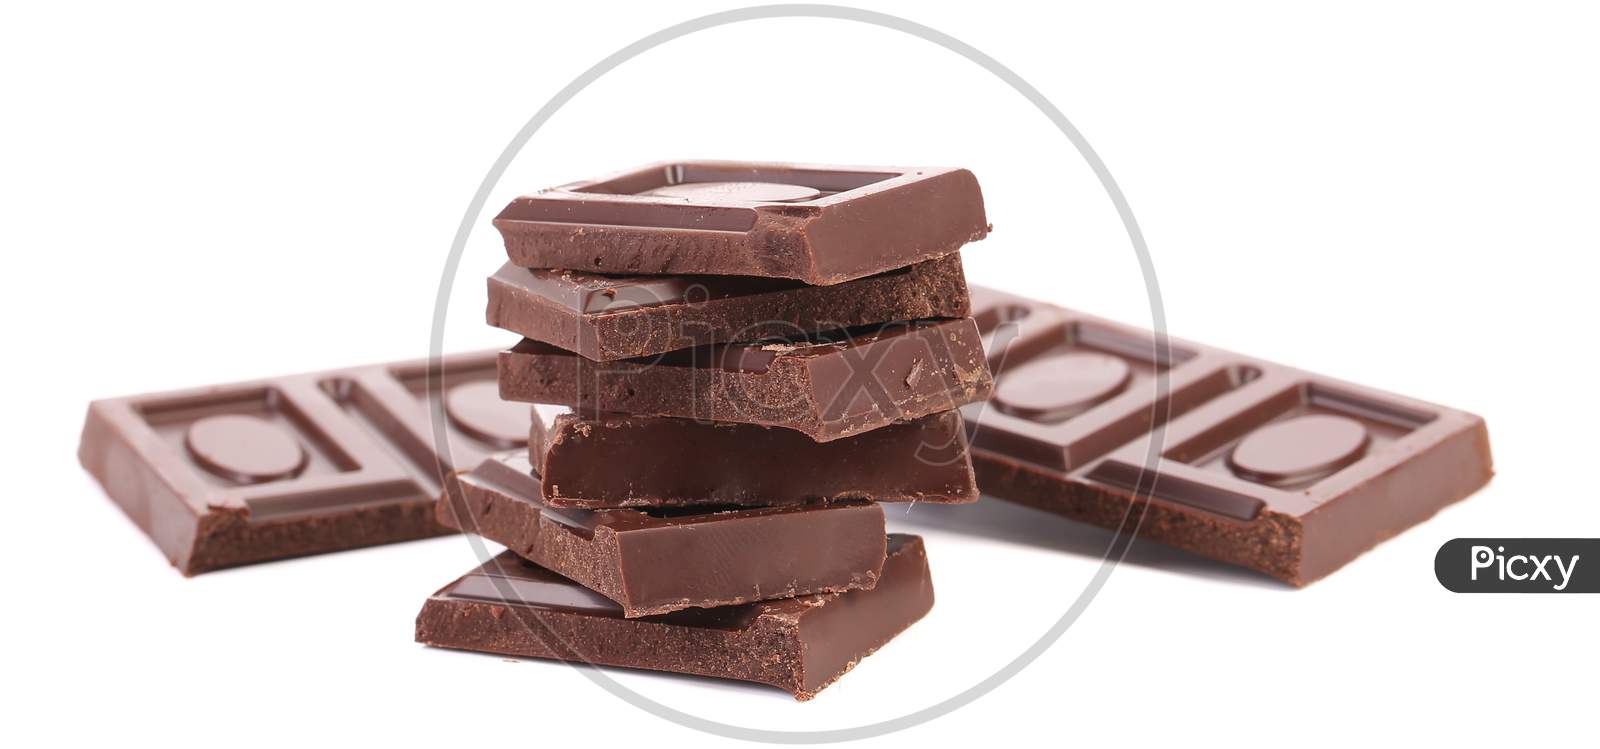 Stack Of Chocolate Bars Broken. Isolated On A White Background.